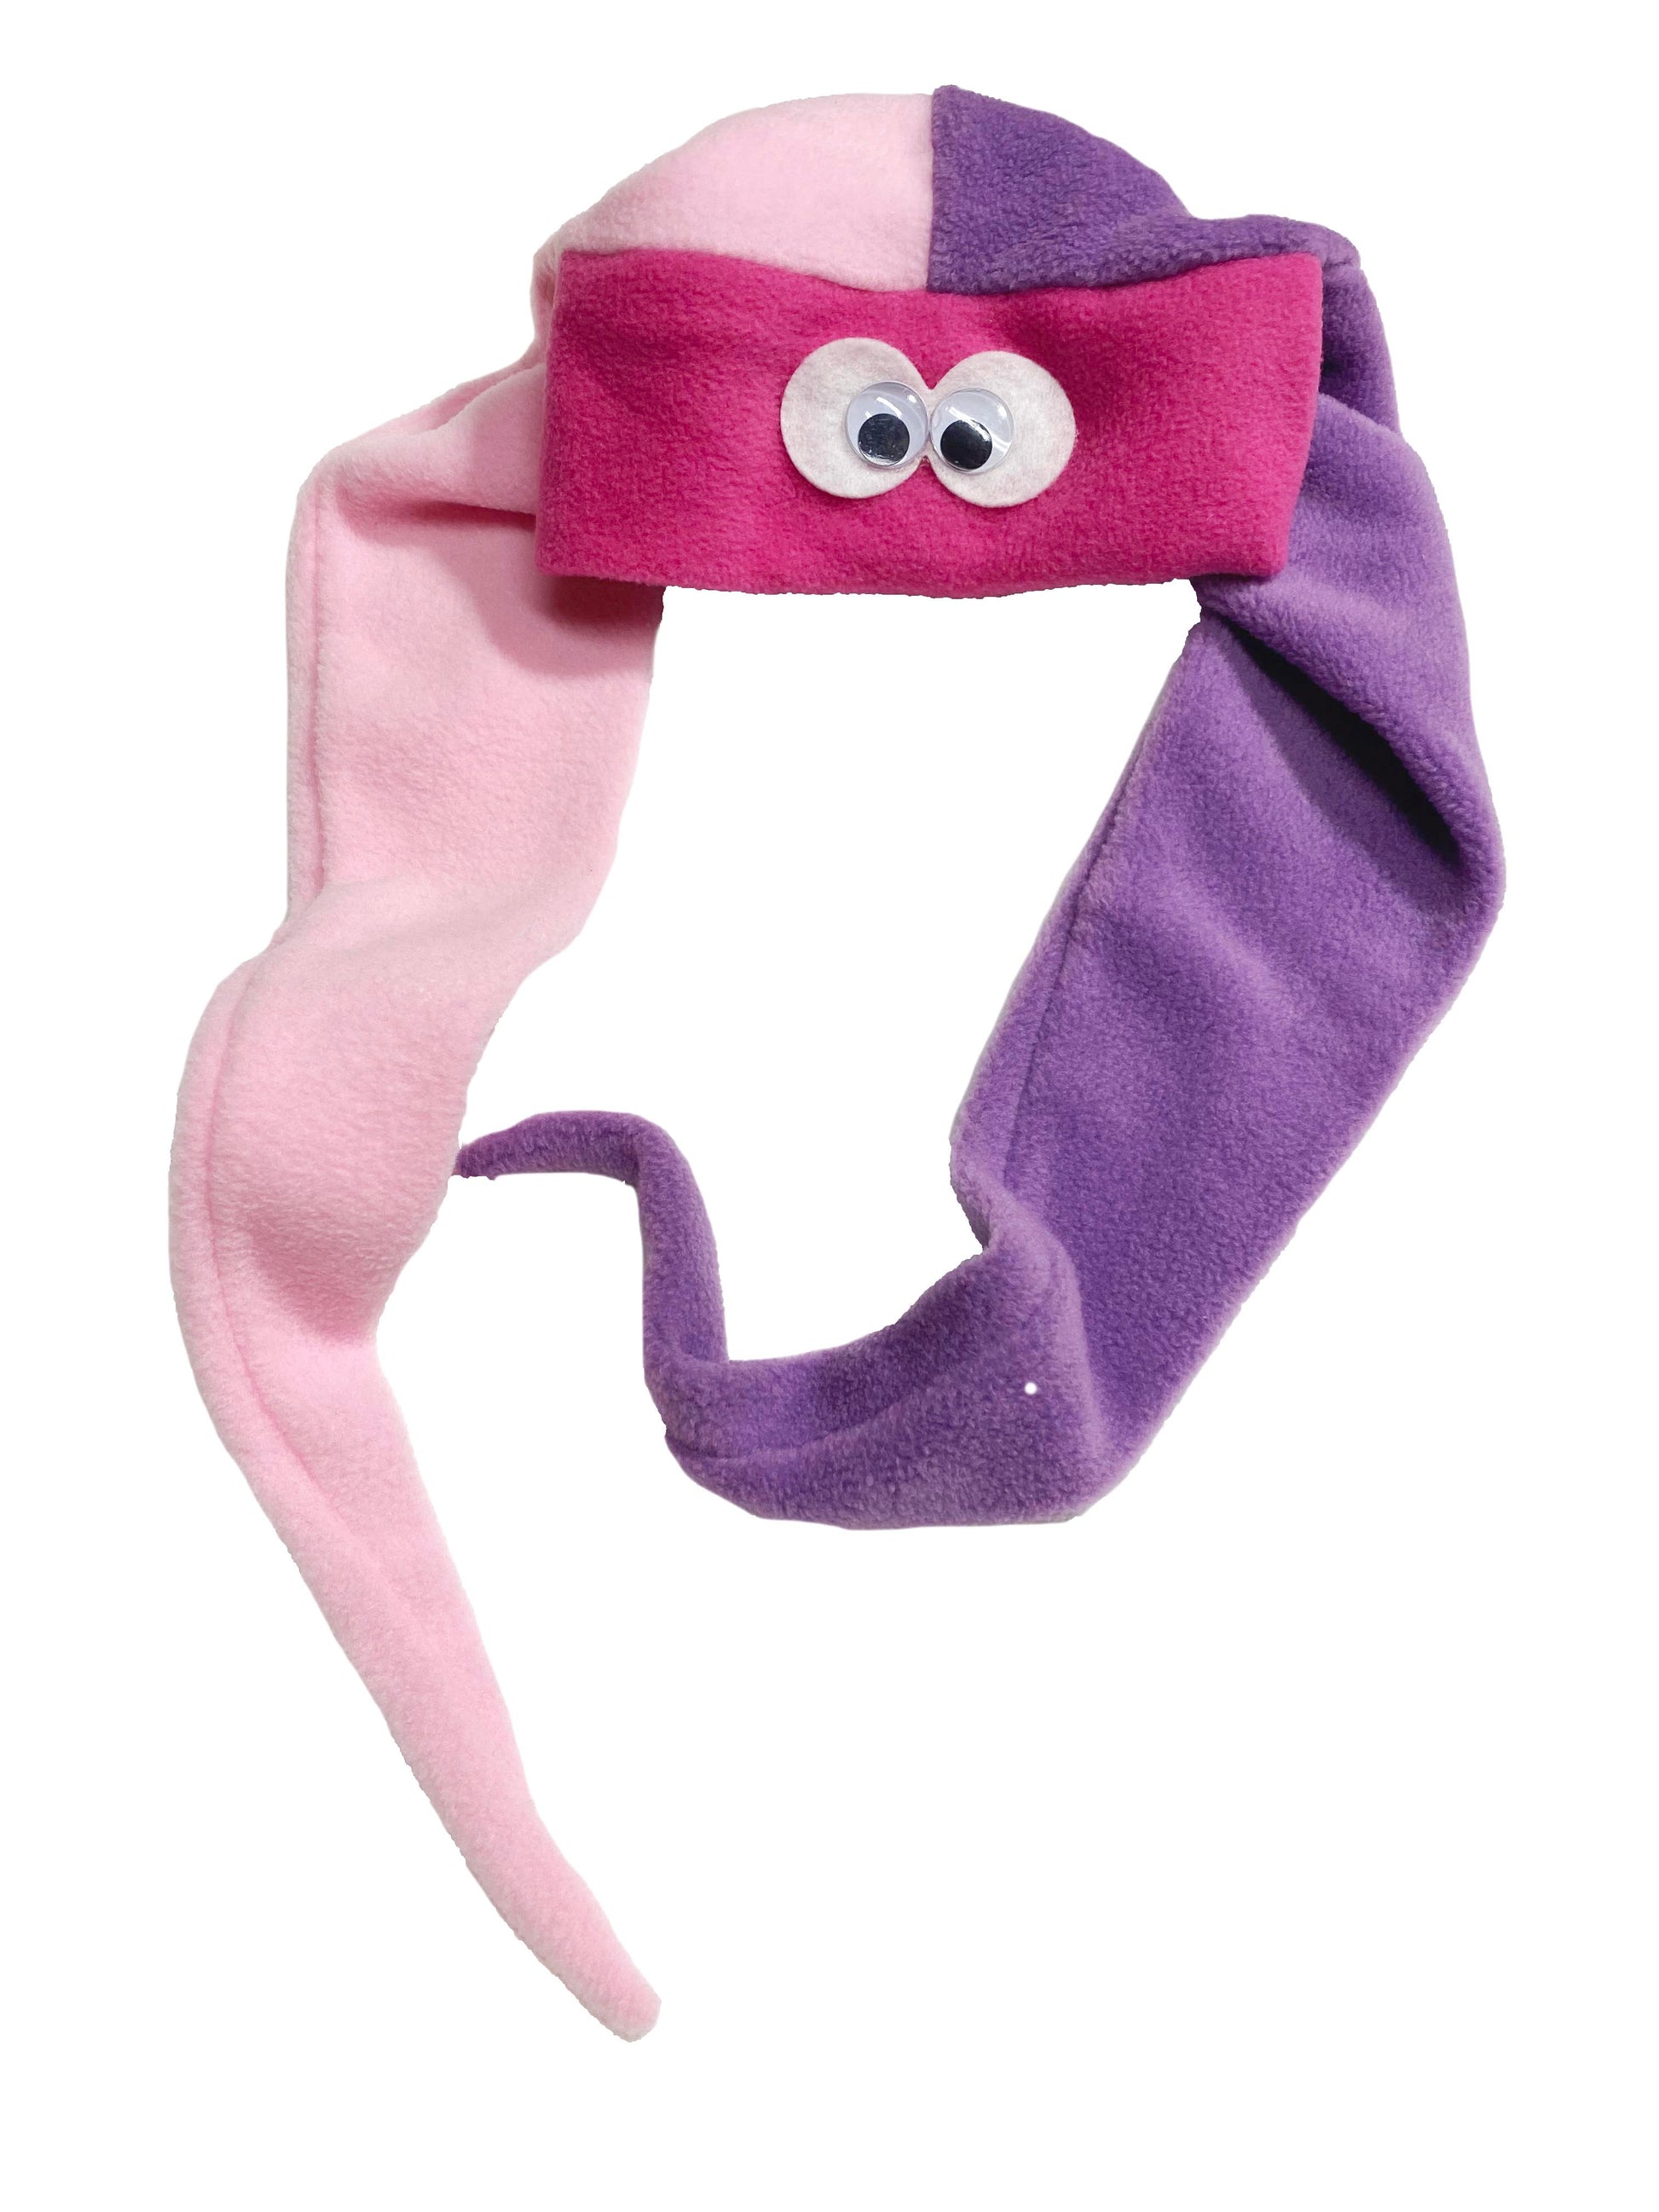 Scarfit - Hat & Scarf in one! - Small- fits heads up to 20" - Brainchild Designs